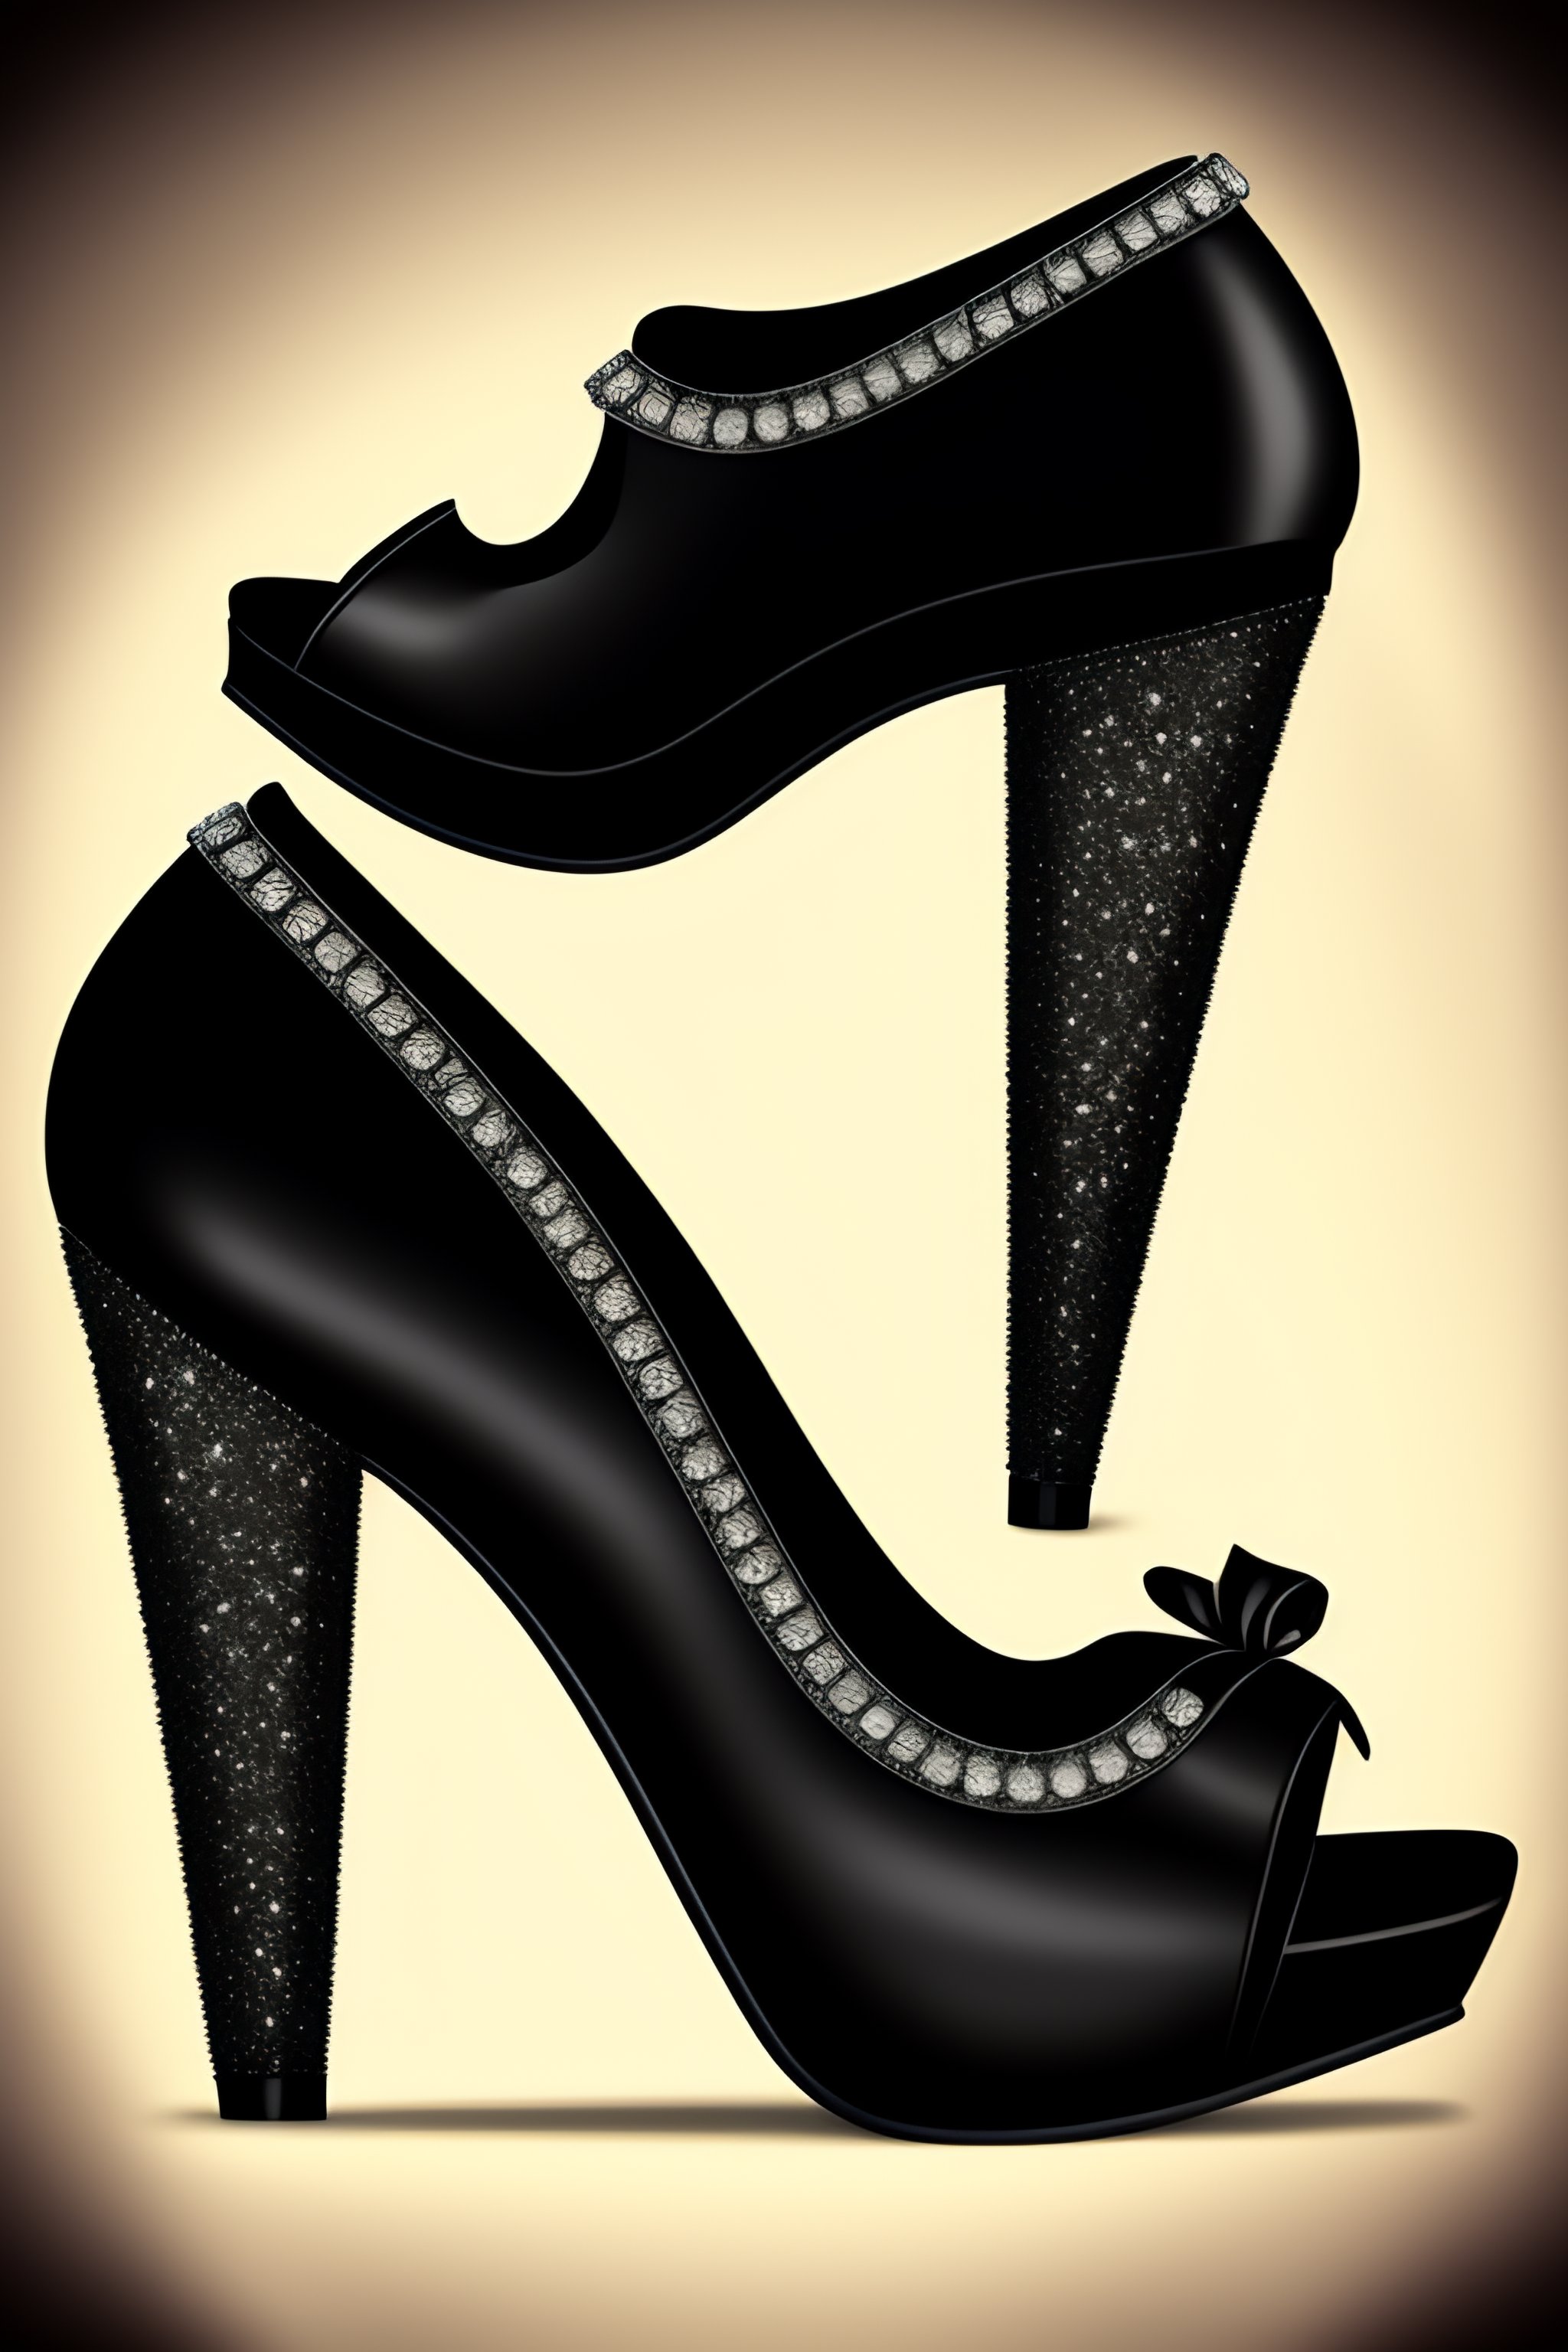 Lexica - Create a luxury shoes and black whit diamond on the heels and ...